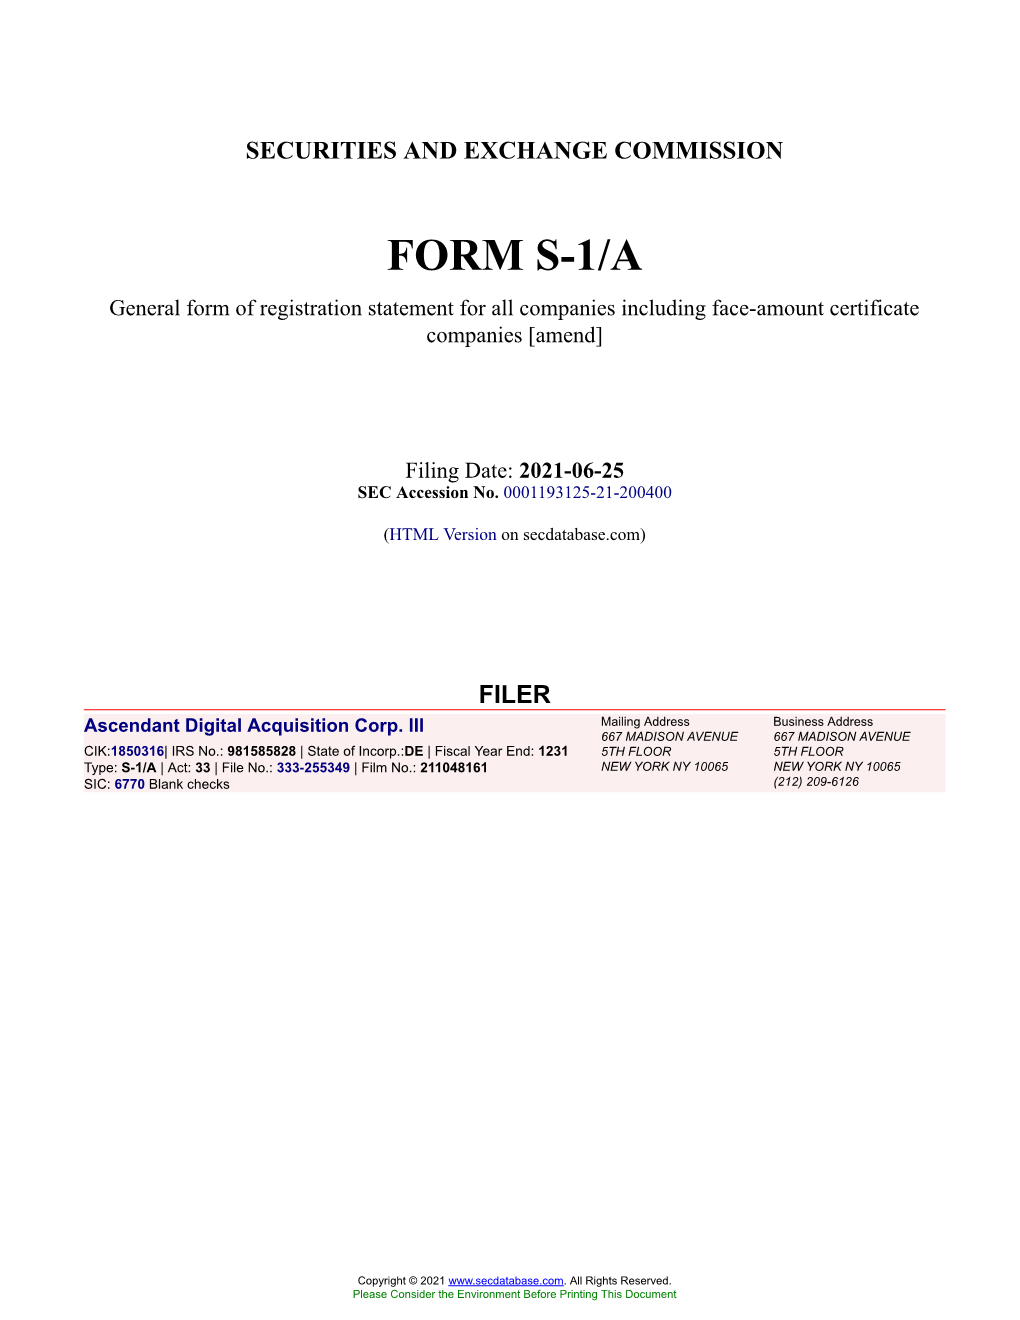 Ascendant Digital Acquisition Corp. III Form S-1/A Filed 2021-06-25